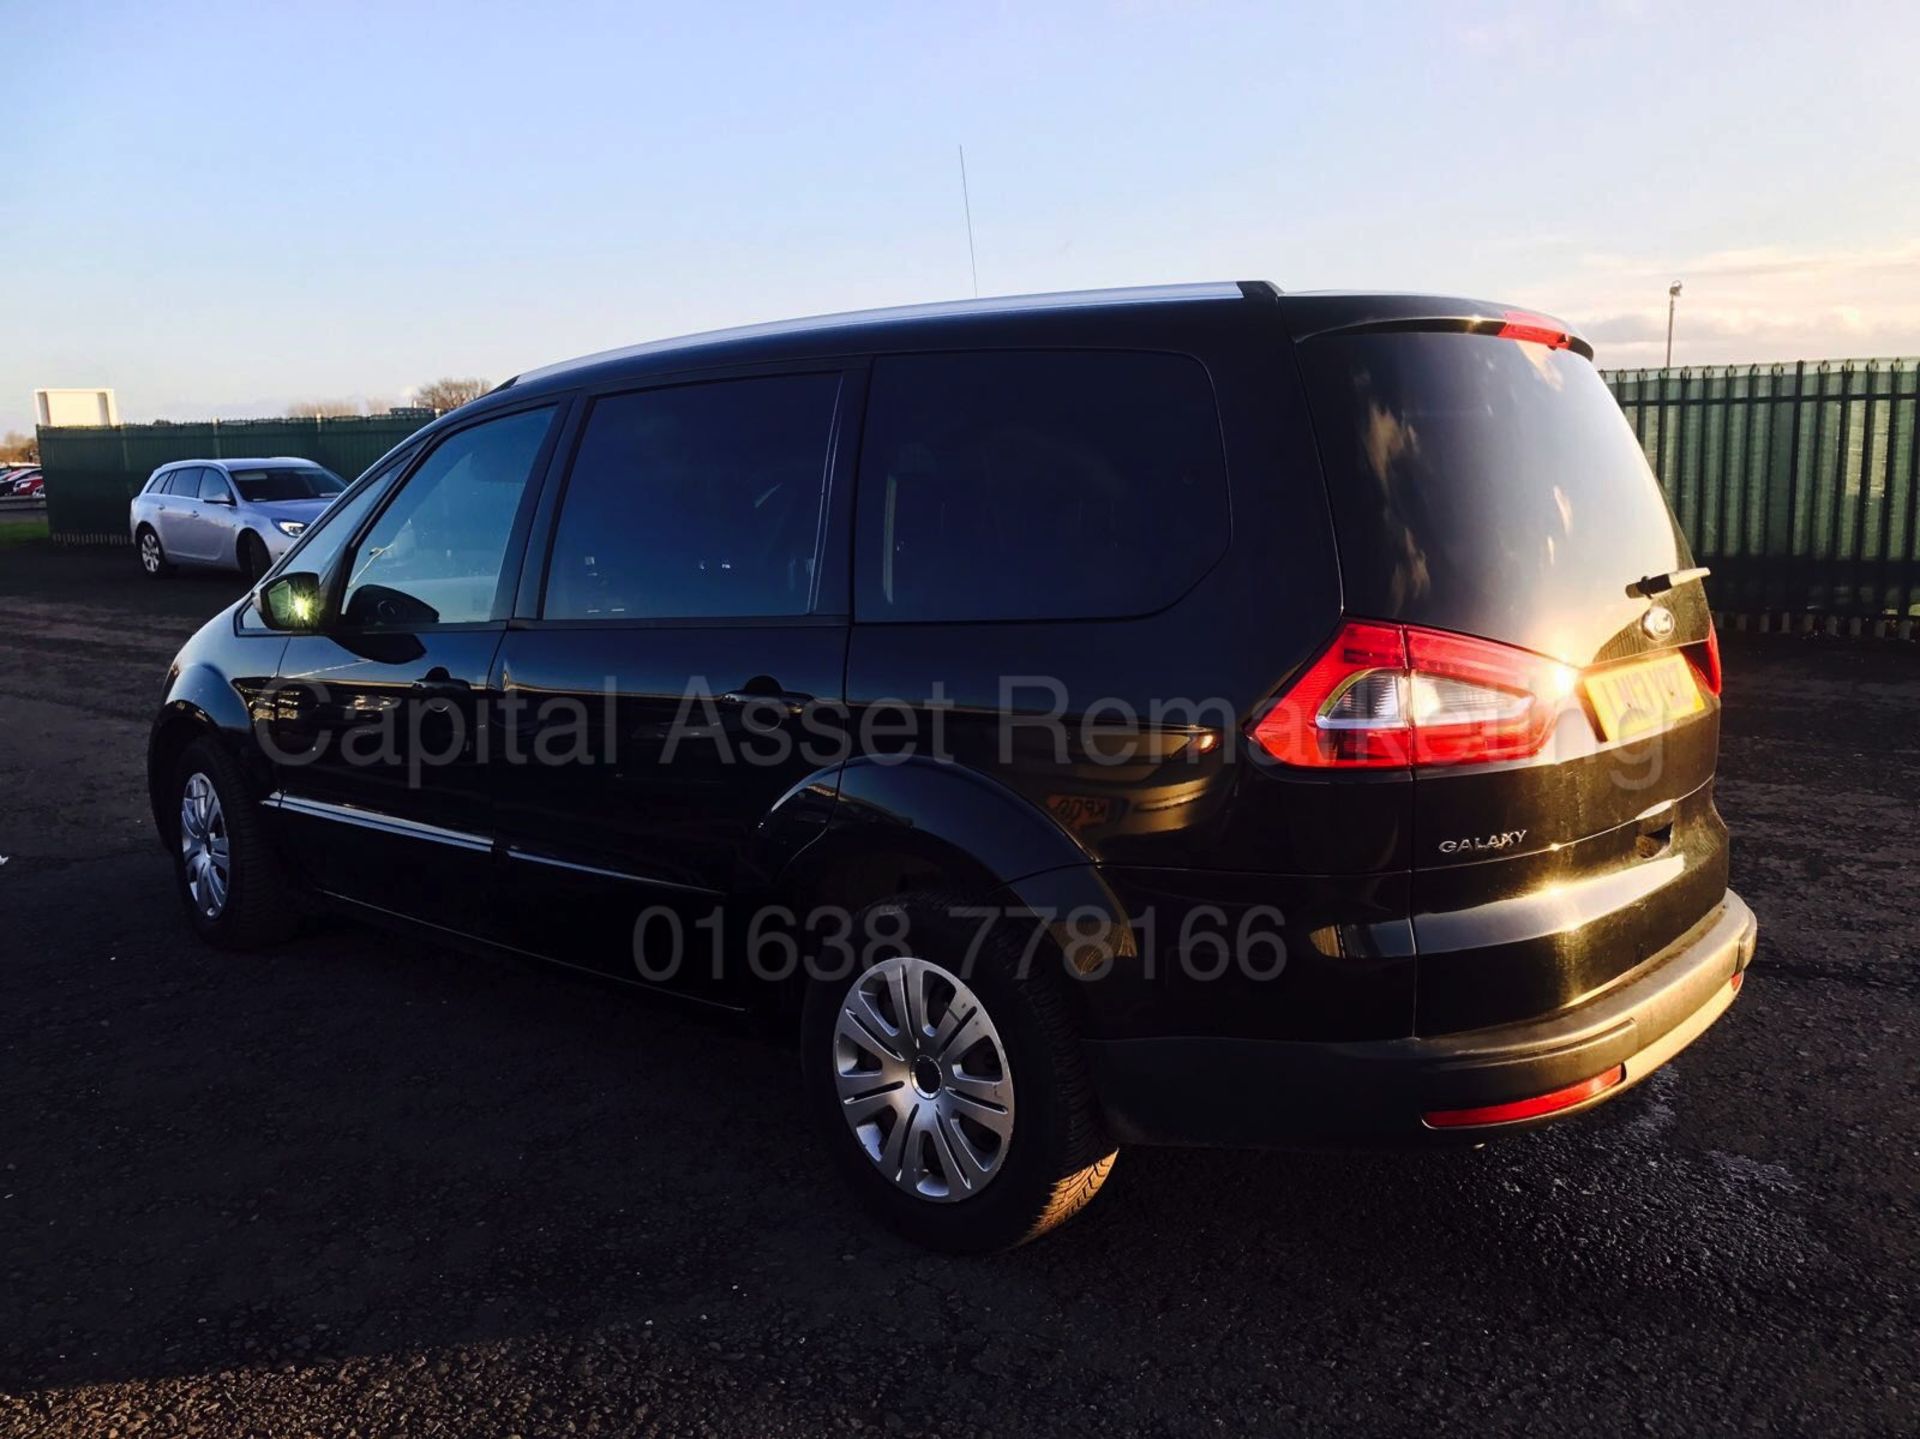 FORD GALAXY 'ZETEC' 7 SEATER (2013 - 13 REG) 2.0 TDCI - 140 BHP POWER SHIFT (1 OWNER) *FULL HISTORY* - Image 4 of 14